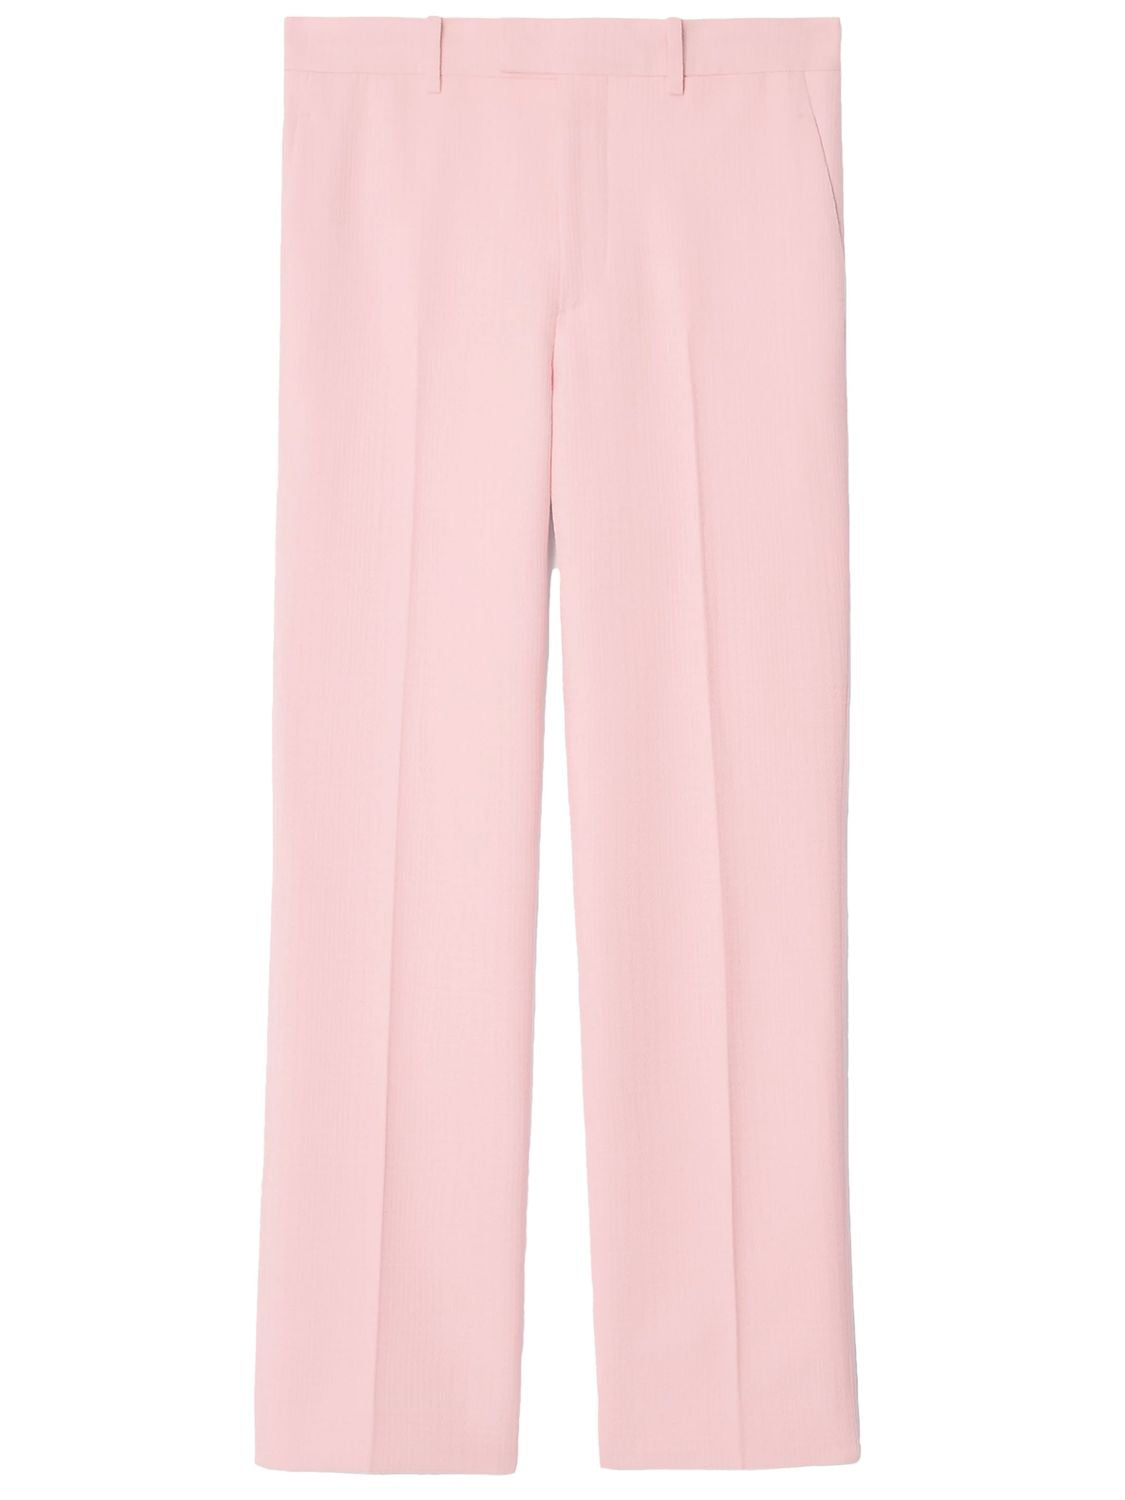 Tailored Trousers in Pink Wool - Regular Fit - UK Sizing